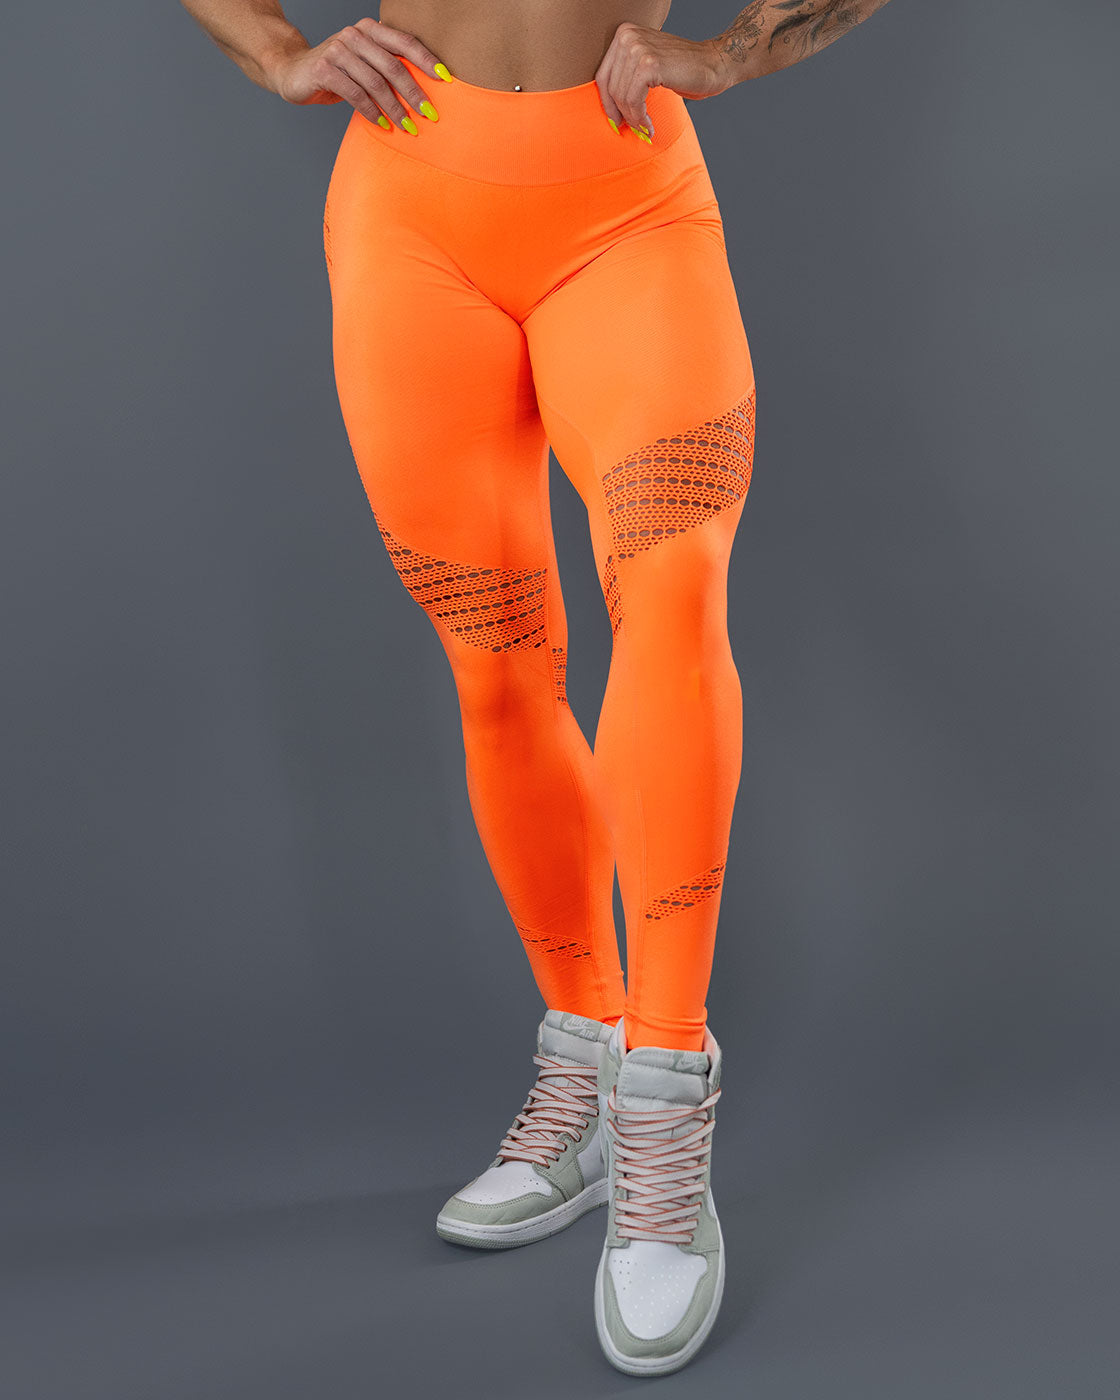 Orange Leggings. Neon FleeceThis Outfit Gives Me All The Spring